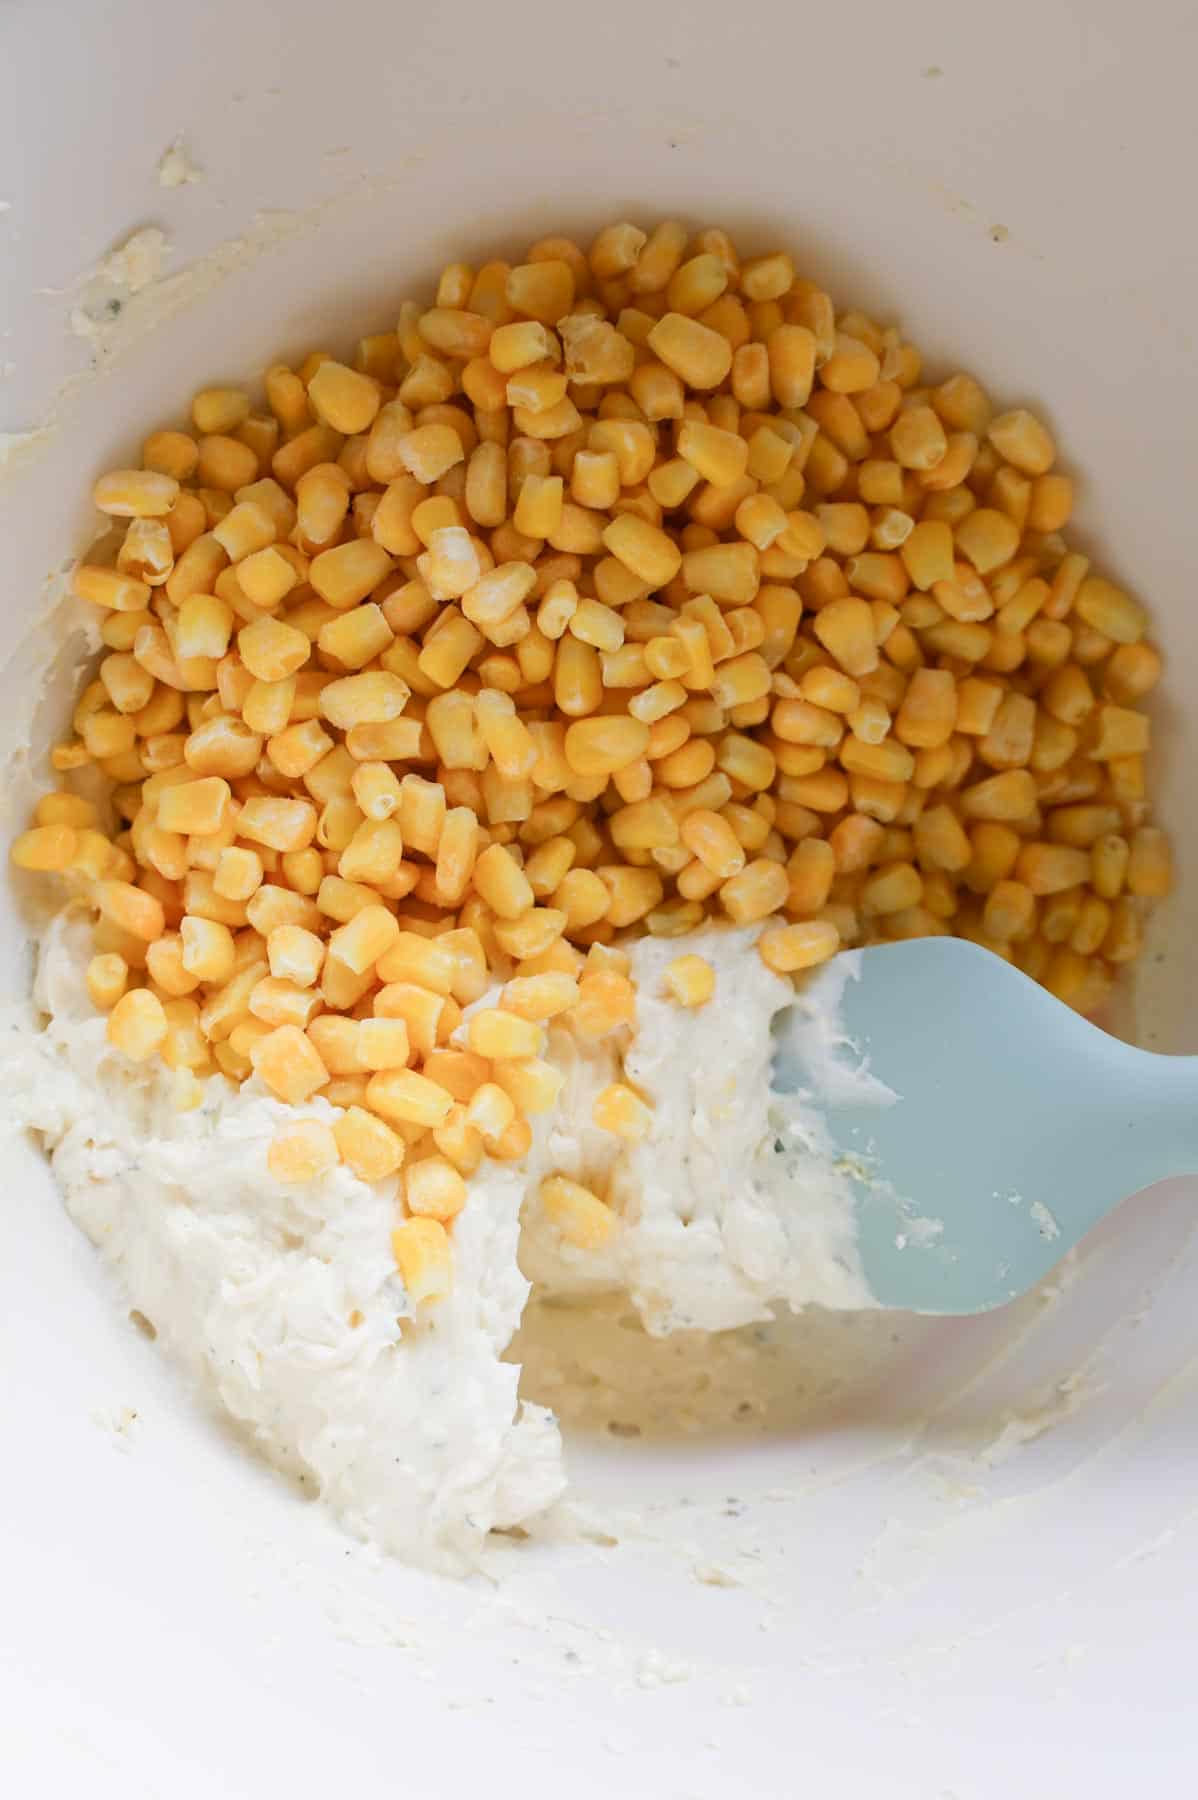 corn kernels on top of cream cheese mixture in a bowl